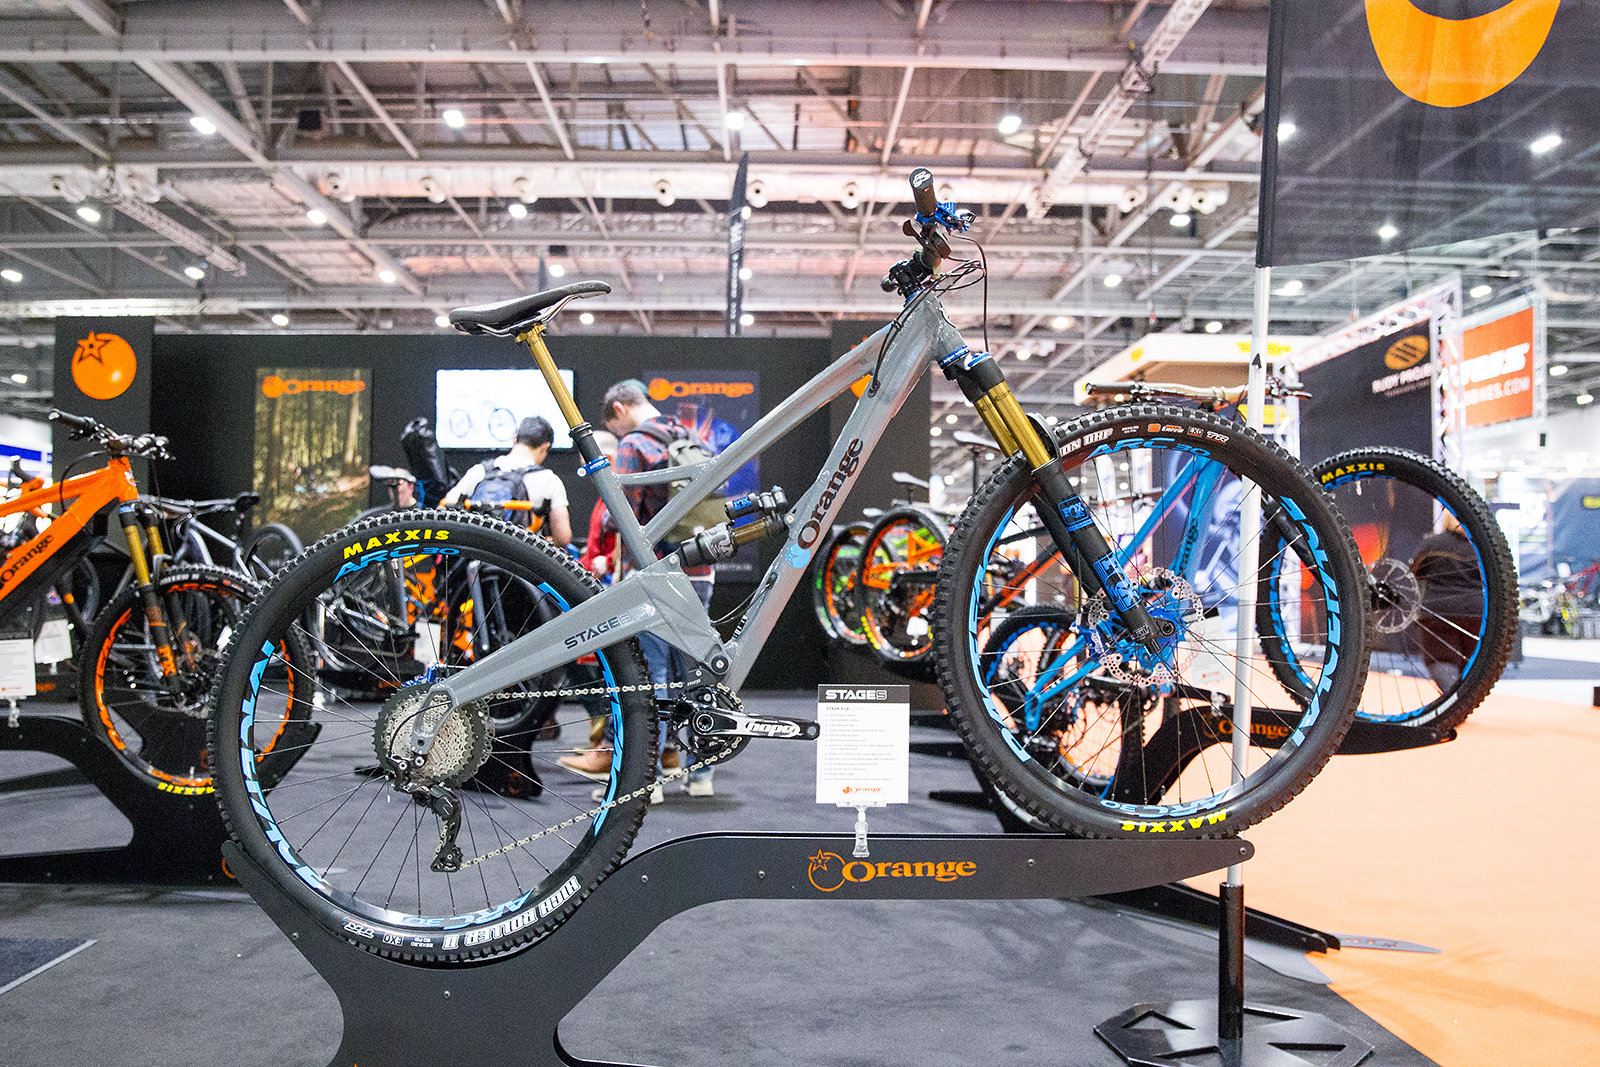 Coverage of The London Bike Show at The Excel Arena, London, London, United Kingdom on February 16 2017. Photo: Charles A Robertson